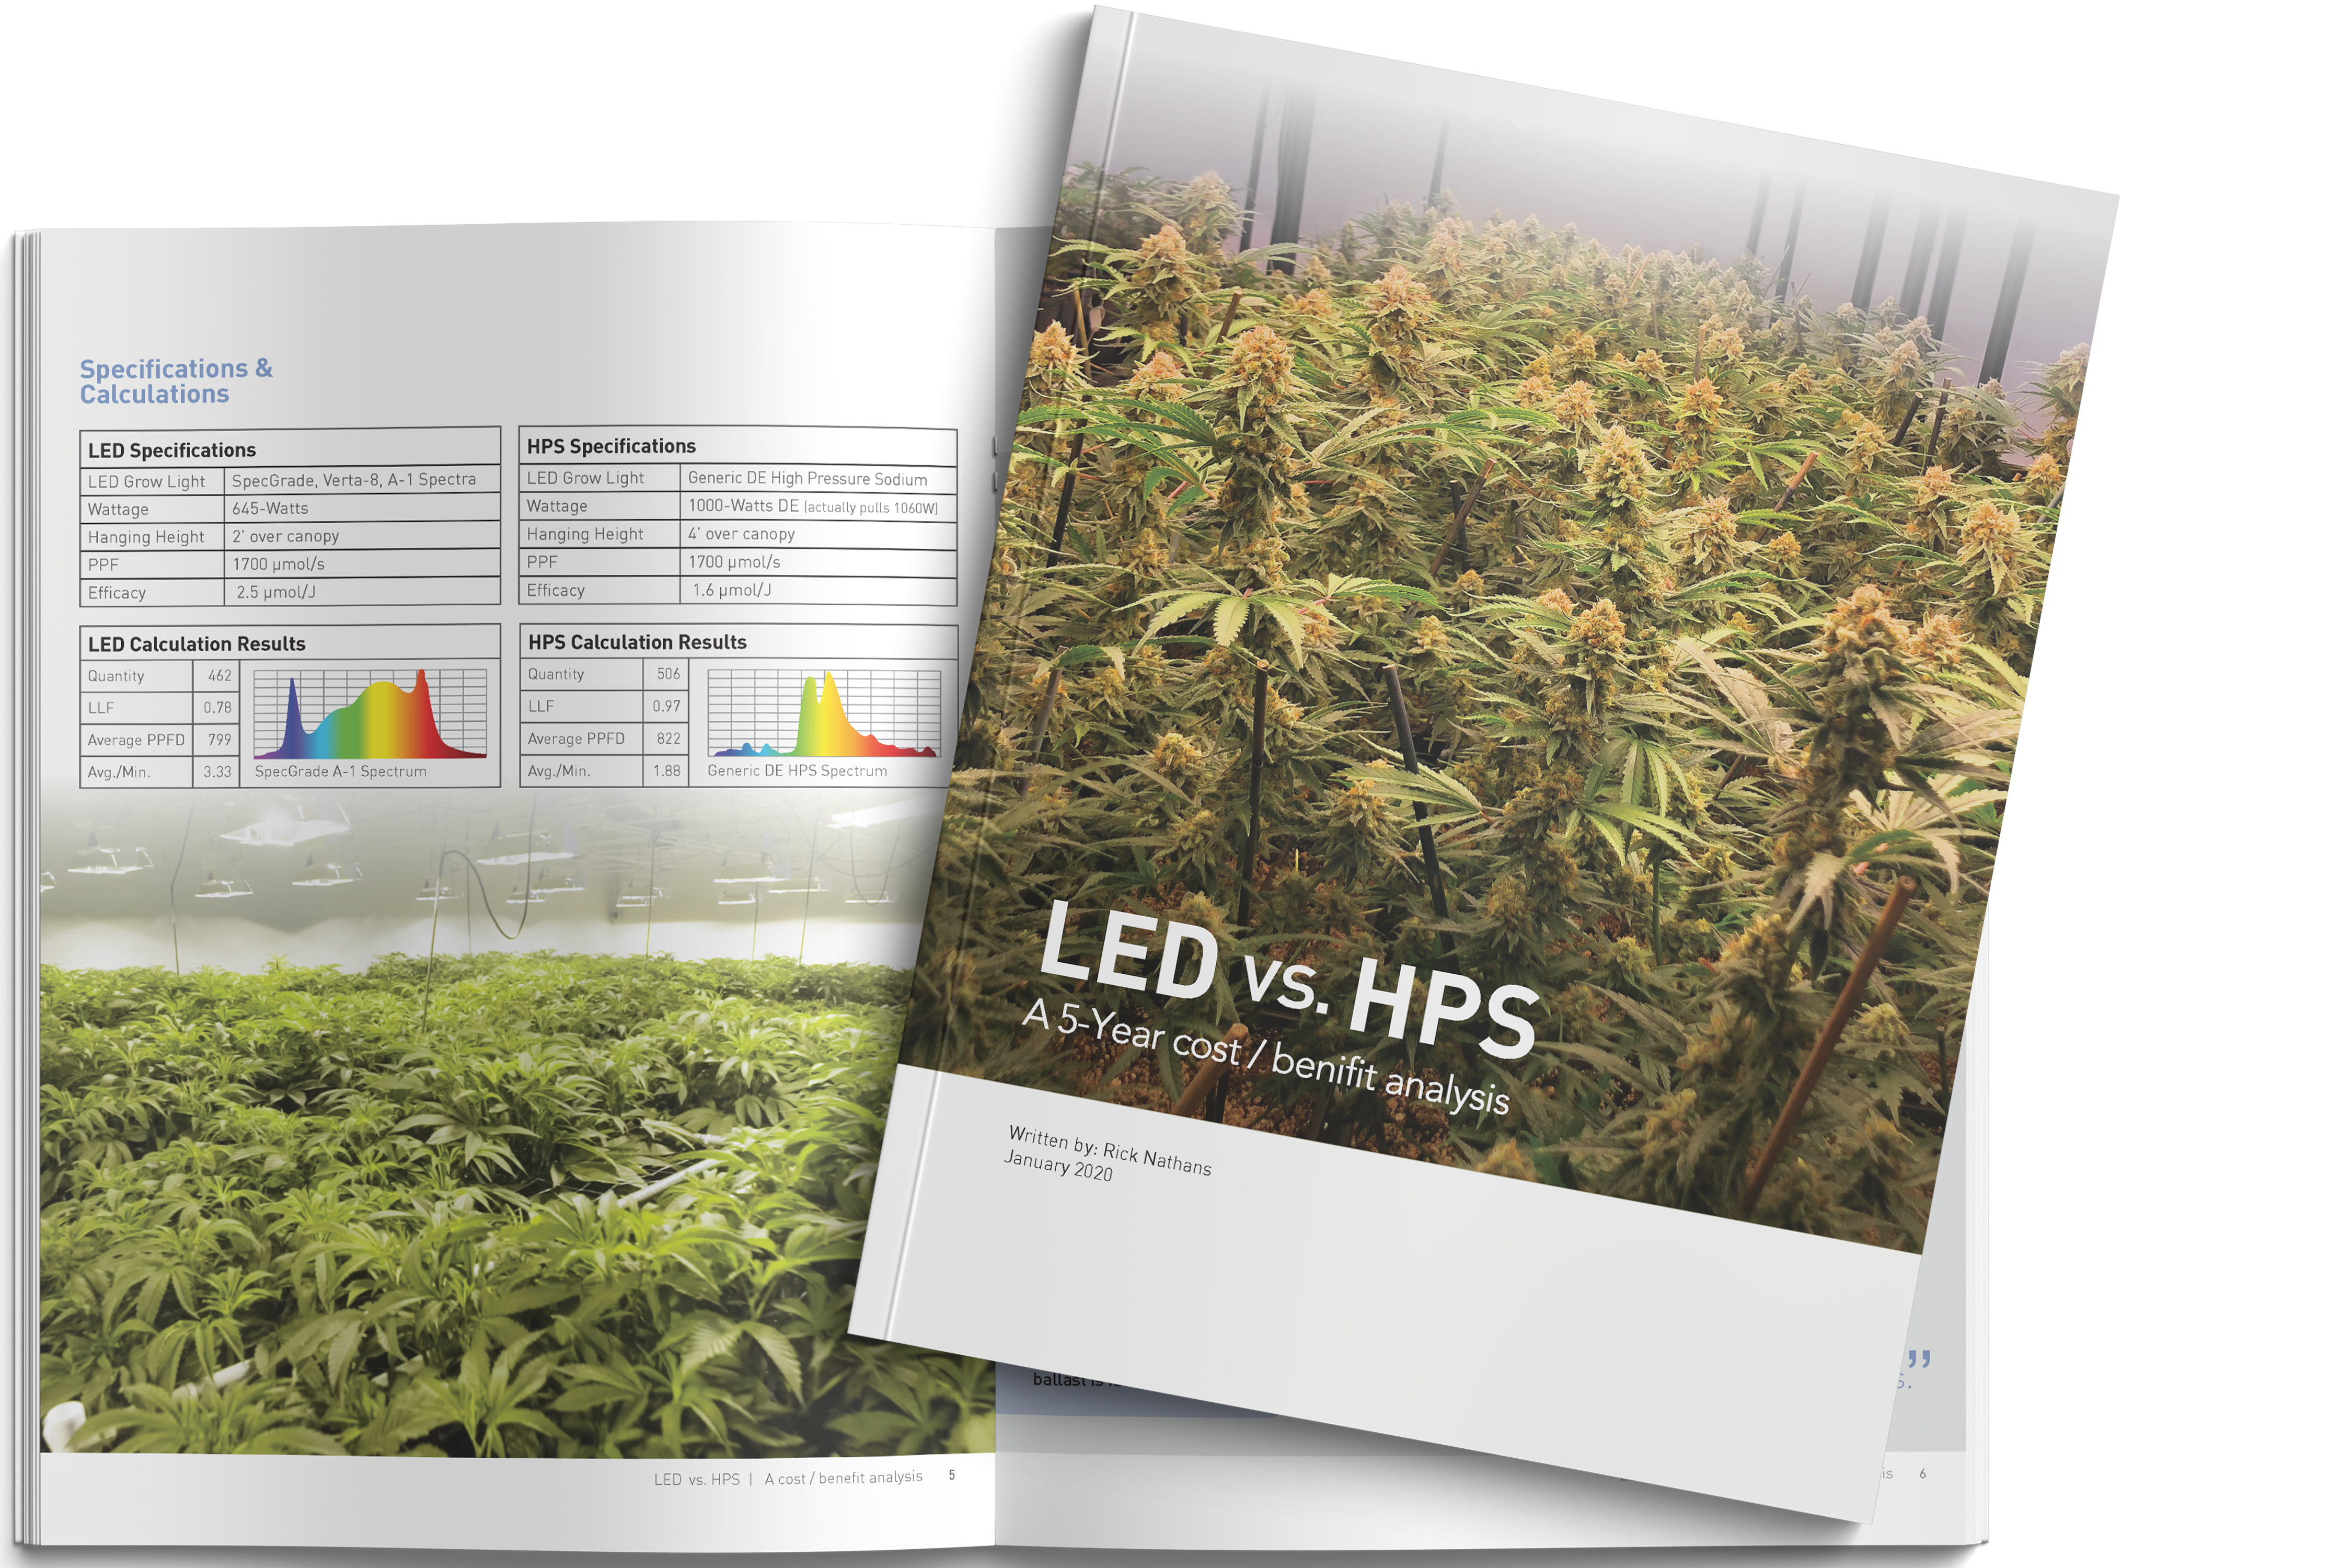 LED vs. HPS: A 5-Year Cost/Benefit Analysis cover and inside pages